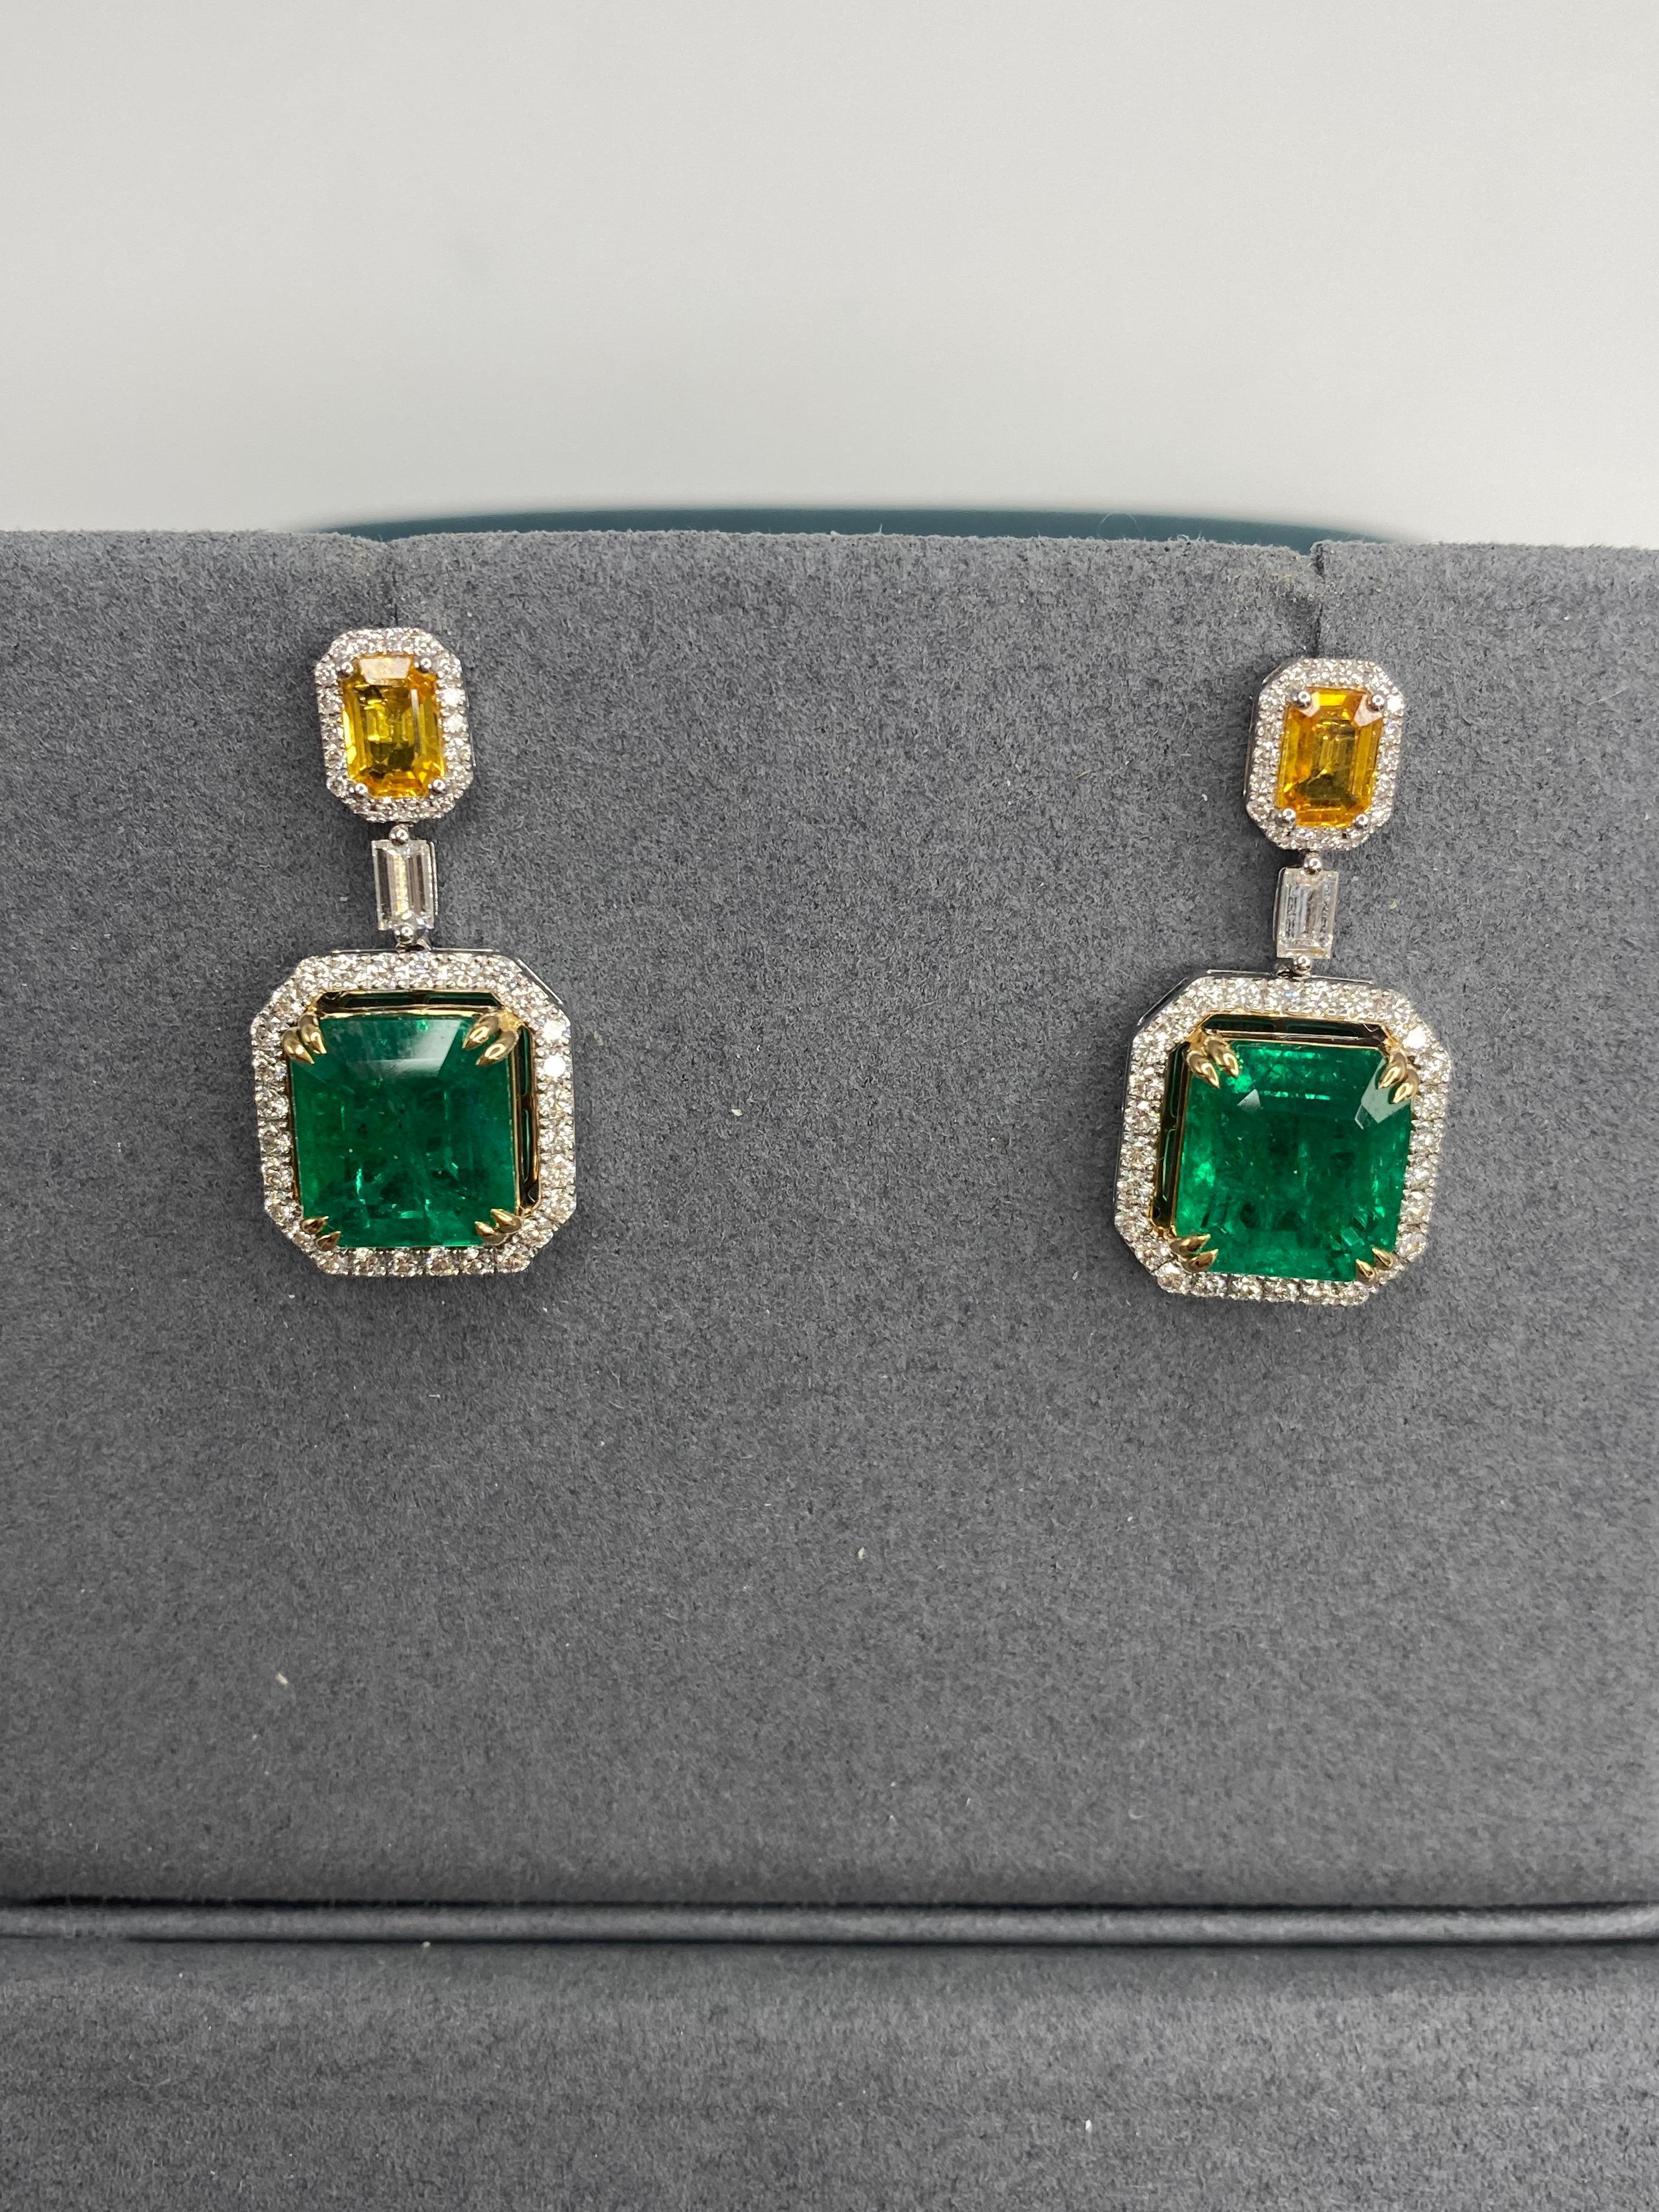 These one of a kind exquisite earrings featuring 2 emeralds 2 Yellow Topaz 92 diamonds will become “the jewel” in your collection. It is rare to find two emeralds of this size color and quality in nature. These beautiful octagon cut AIG certificated